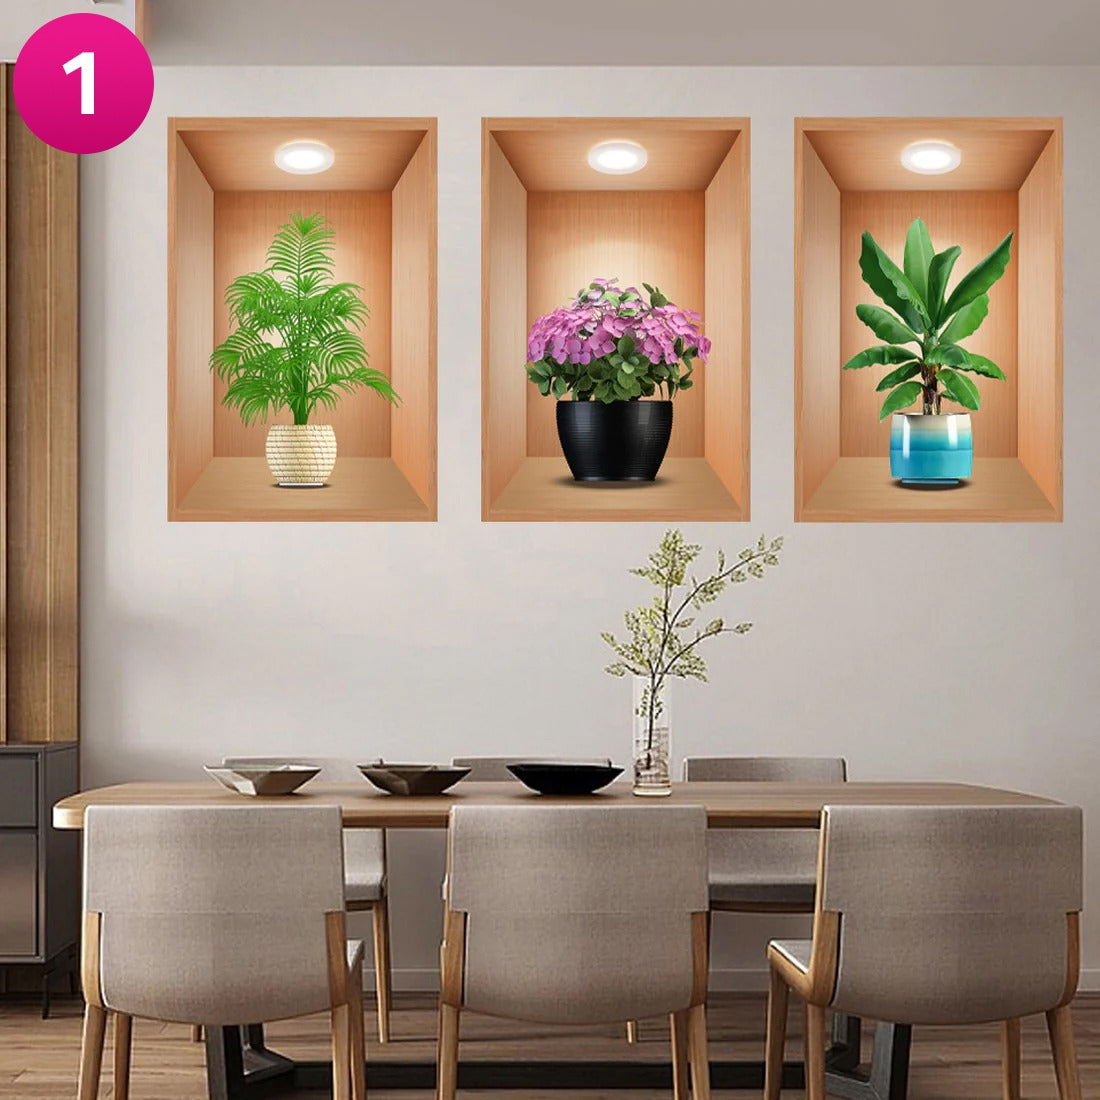 3D Effect Potted Triptych Posters, Decorative Wall Plant Stickers